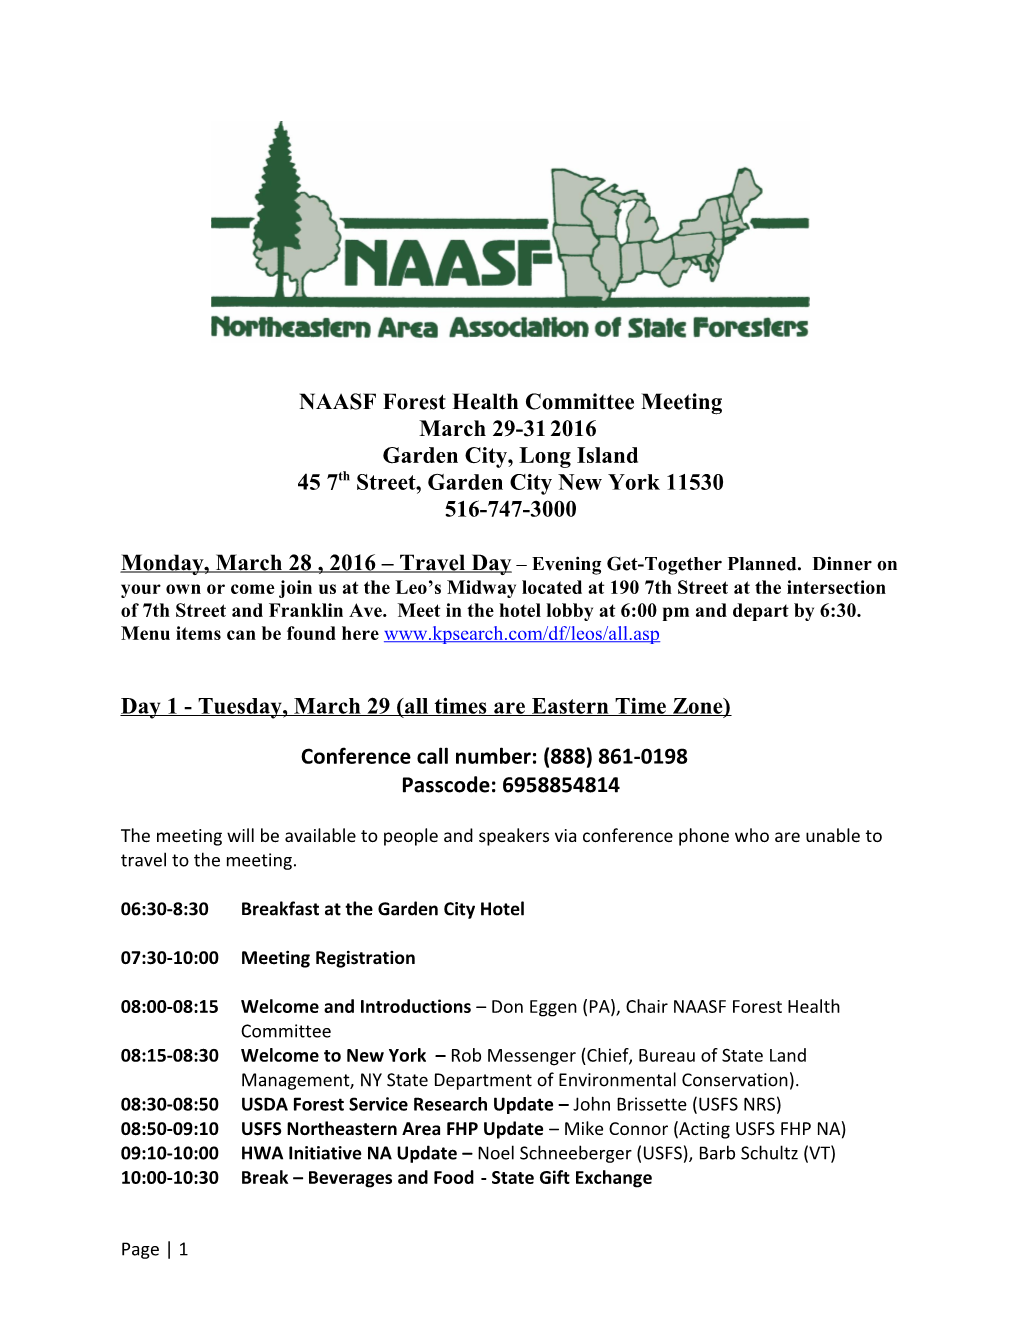 NAASF Forest Health Committee Meeting